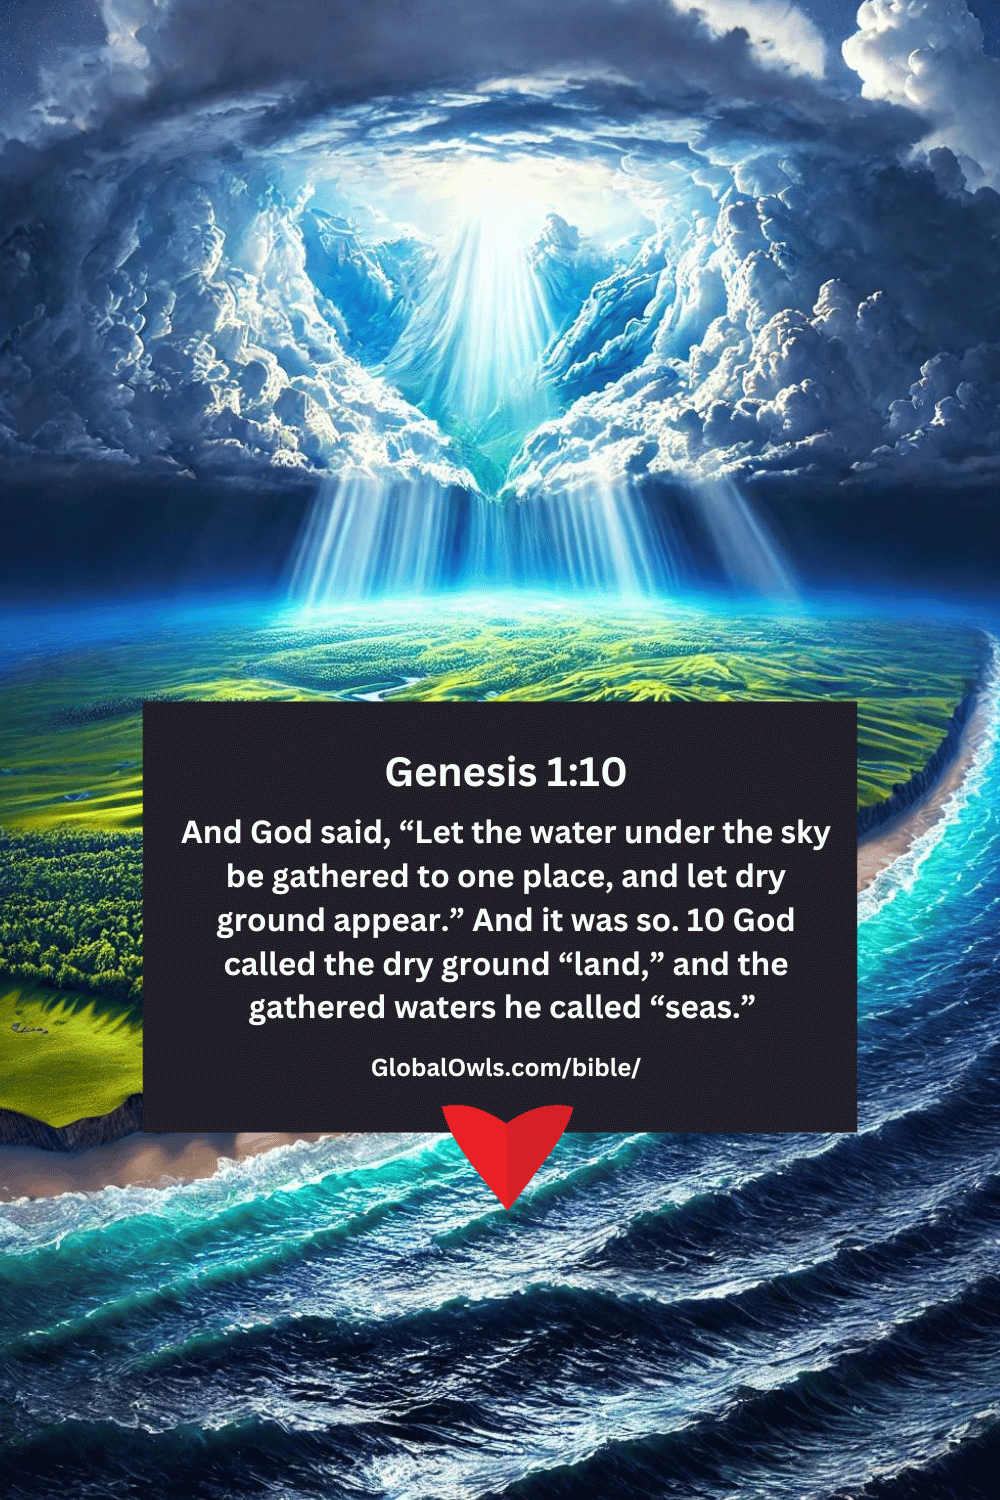 Genesis 1-10 And God said, “Let the water under the sky be gathered to one place, and let dry ground appear.” And it was so. 10 God called the dry ground “land,” and the gathered waters he called